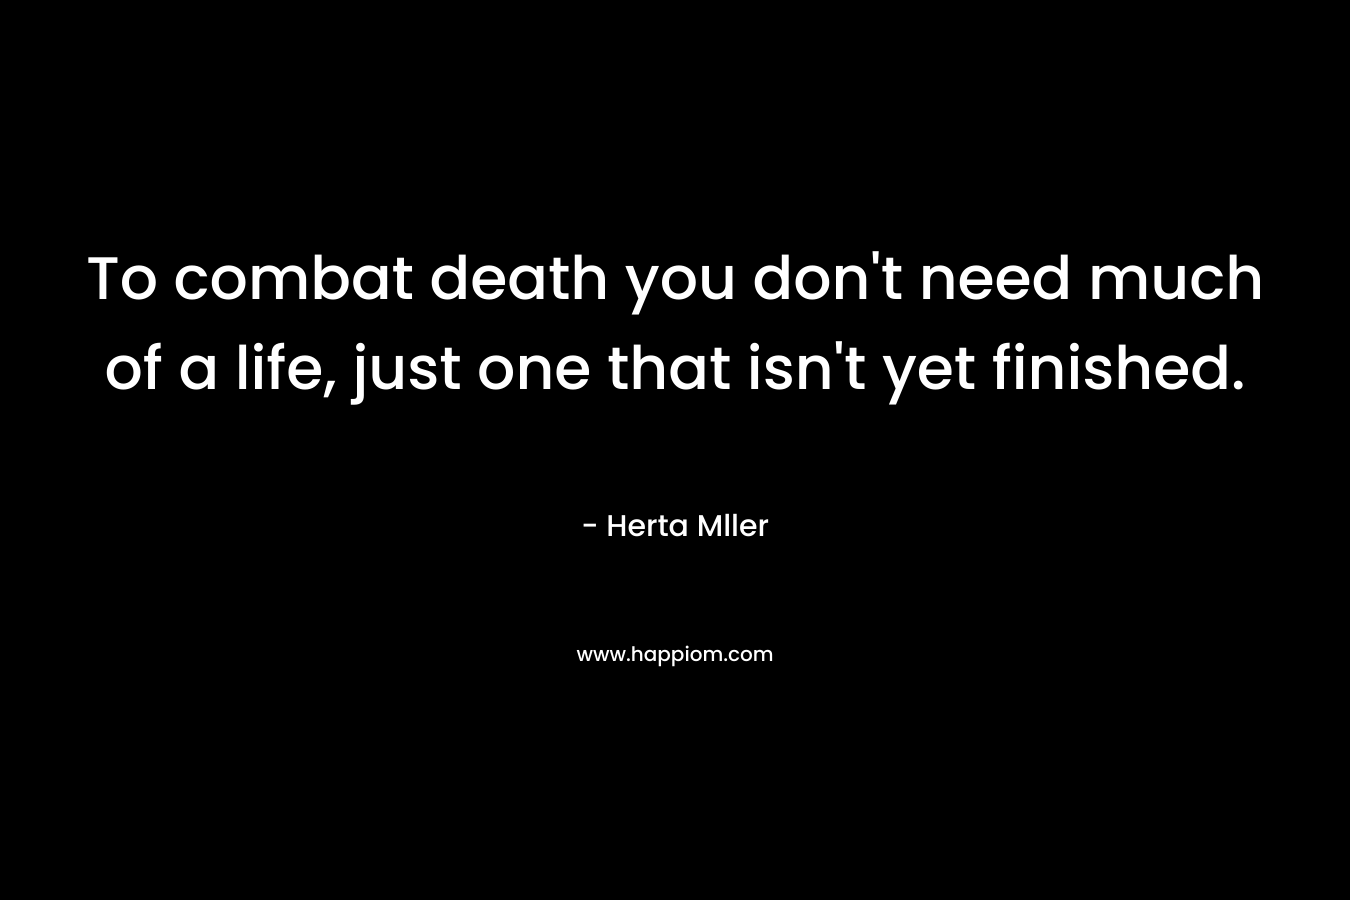 To combat death you don’t need much of a life, just one that isn’t yet finished. – Herta Mller